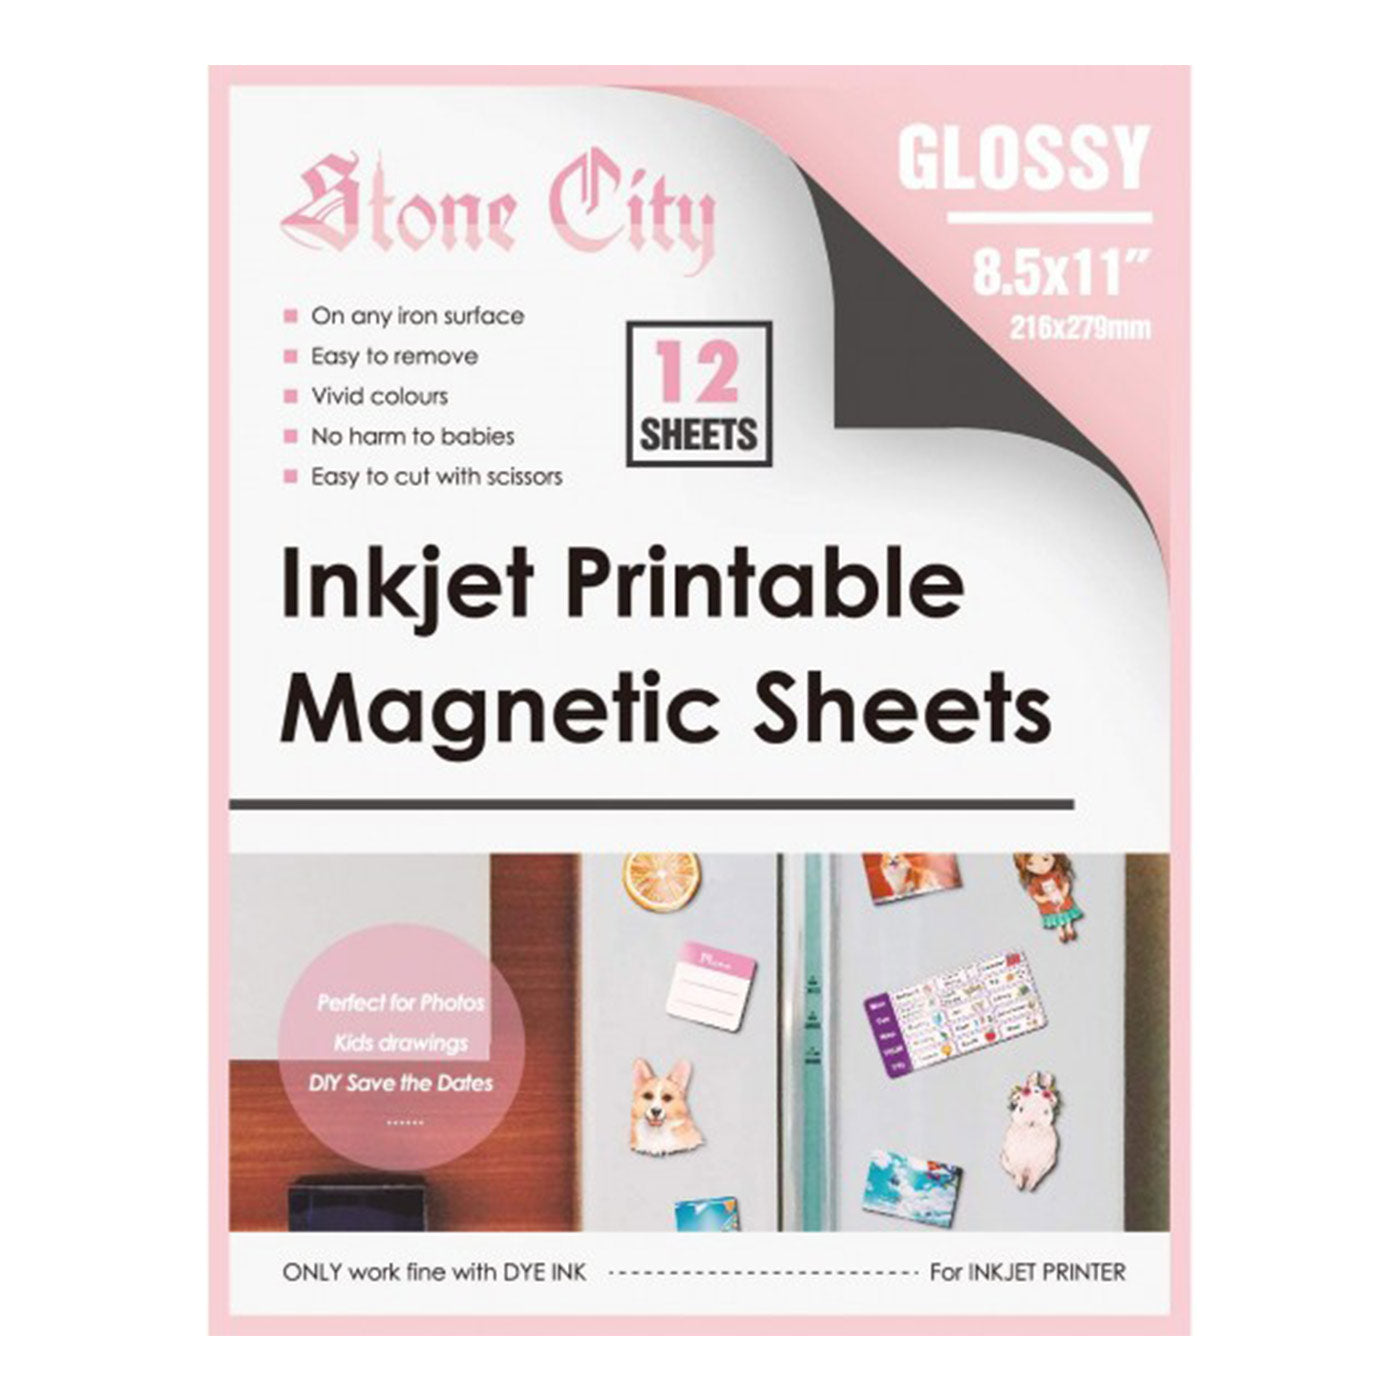 Stone City Glossy Printable Magnetic Sheets 12mil Thick for Inkjet Printers 8.5x 11 Inches